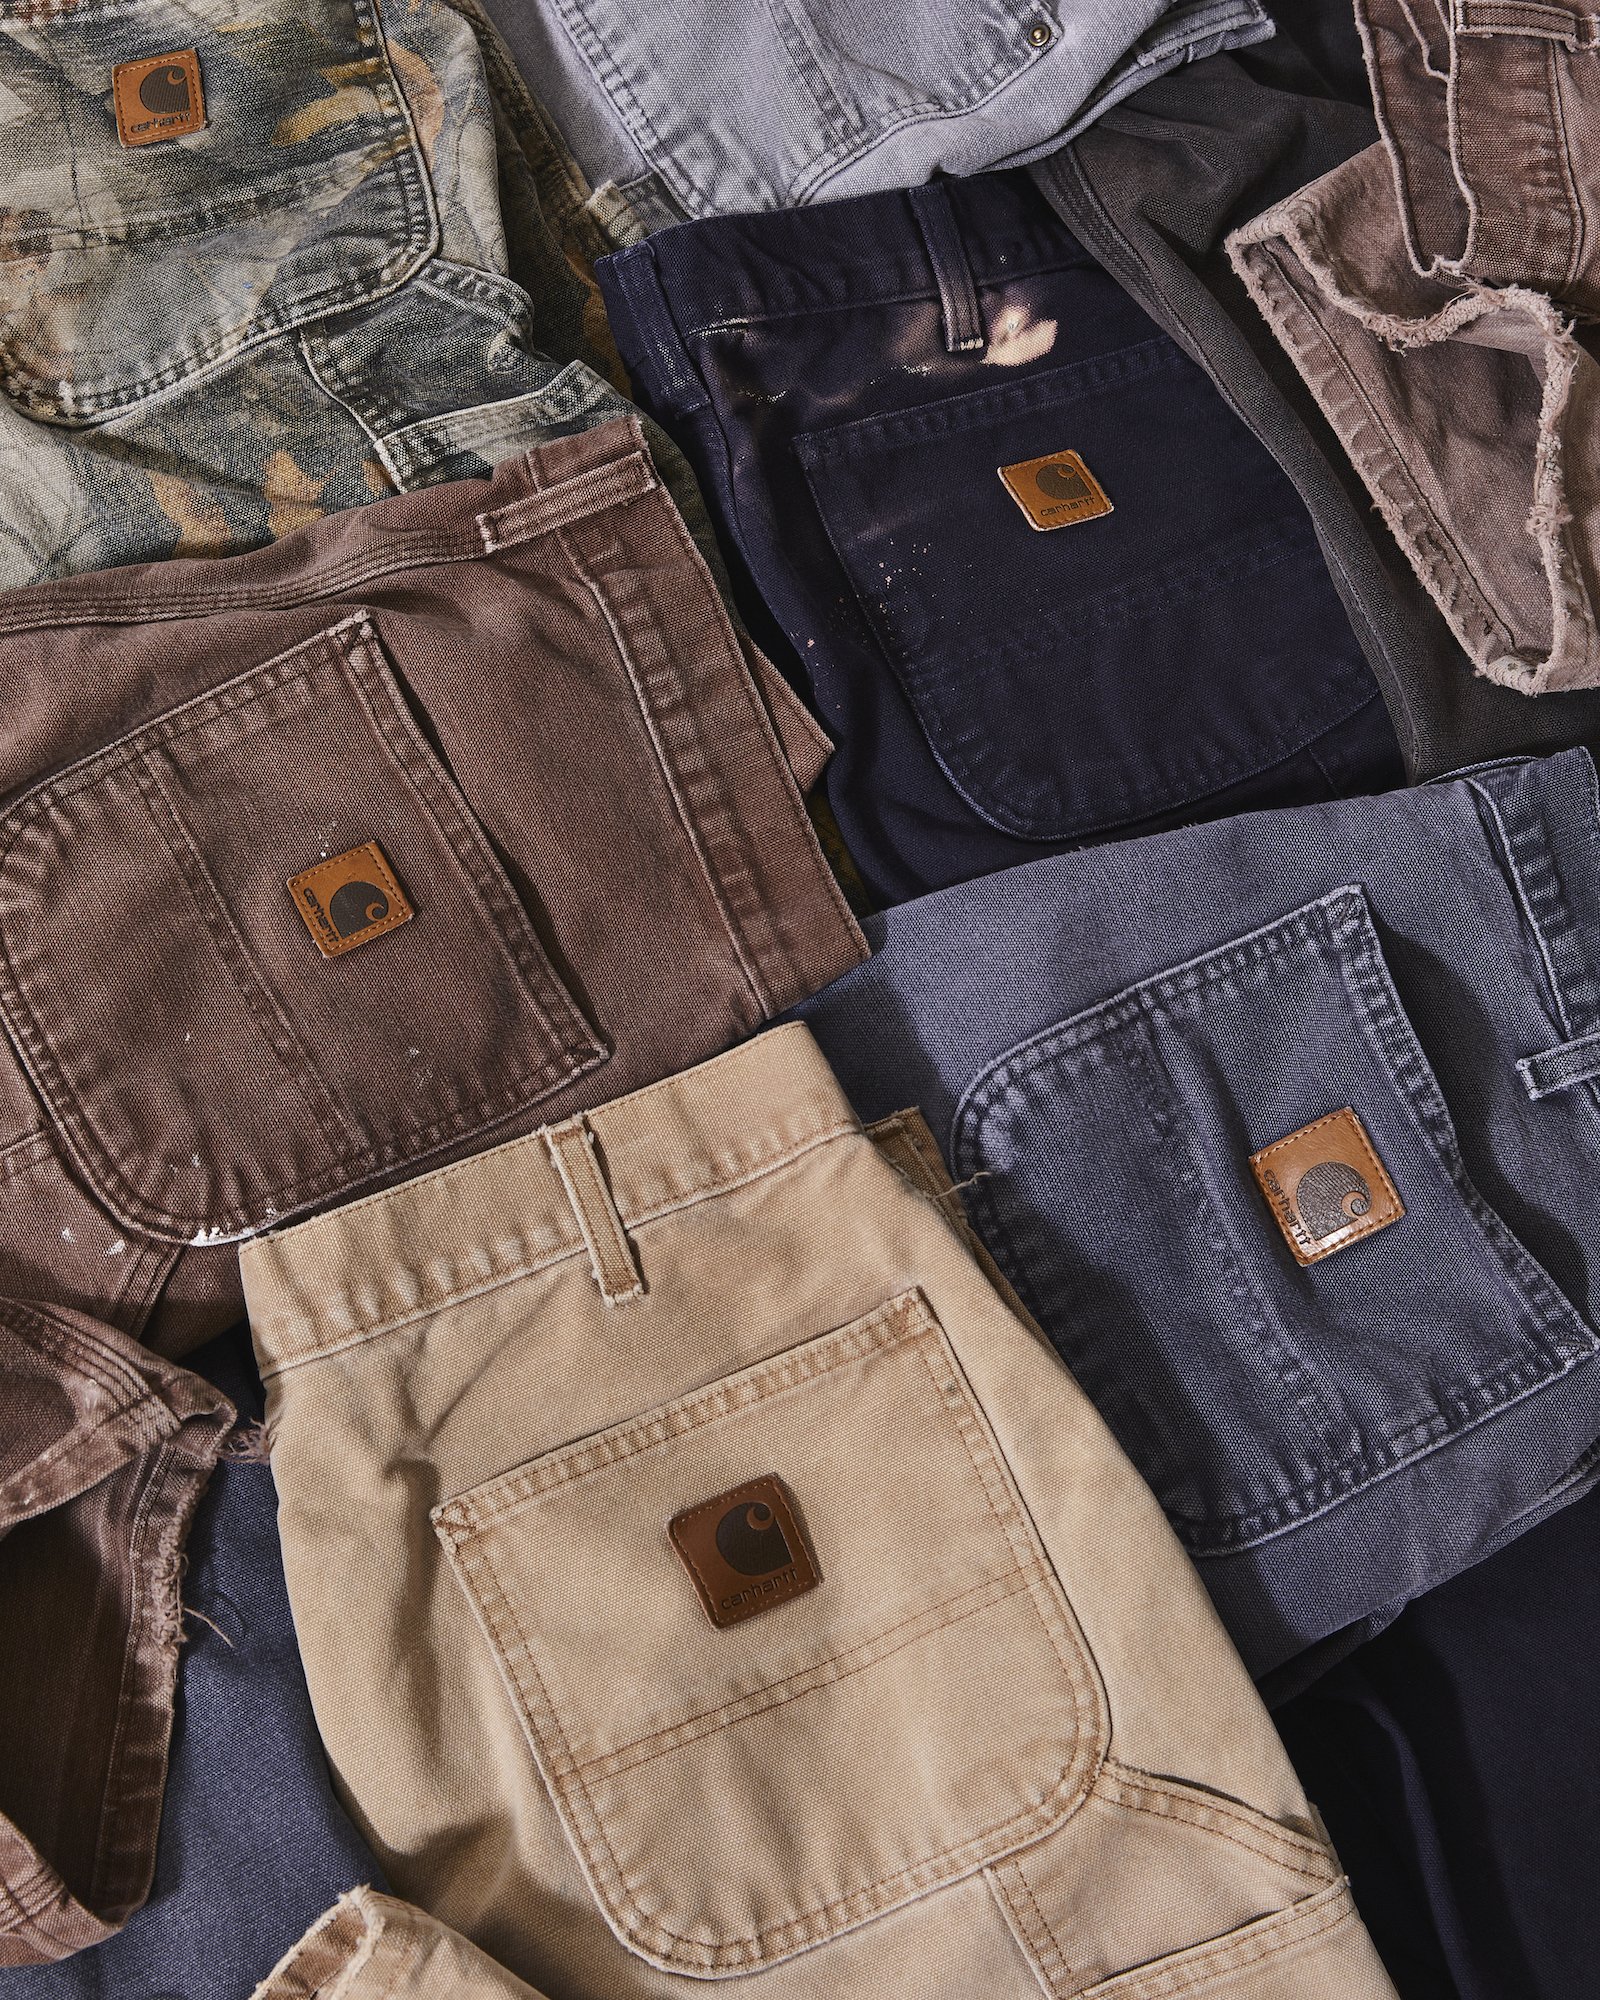 Urban Outfitters on Twitter: "one-off vintage @Carhartt pants online now!  grab a pair before they all sell out. #UOMens https://t.co/KwrczStkzQ  https://t.co/GHo1Di77jo" / Twitter